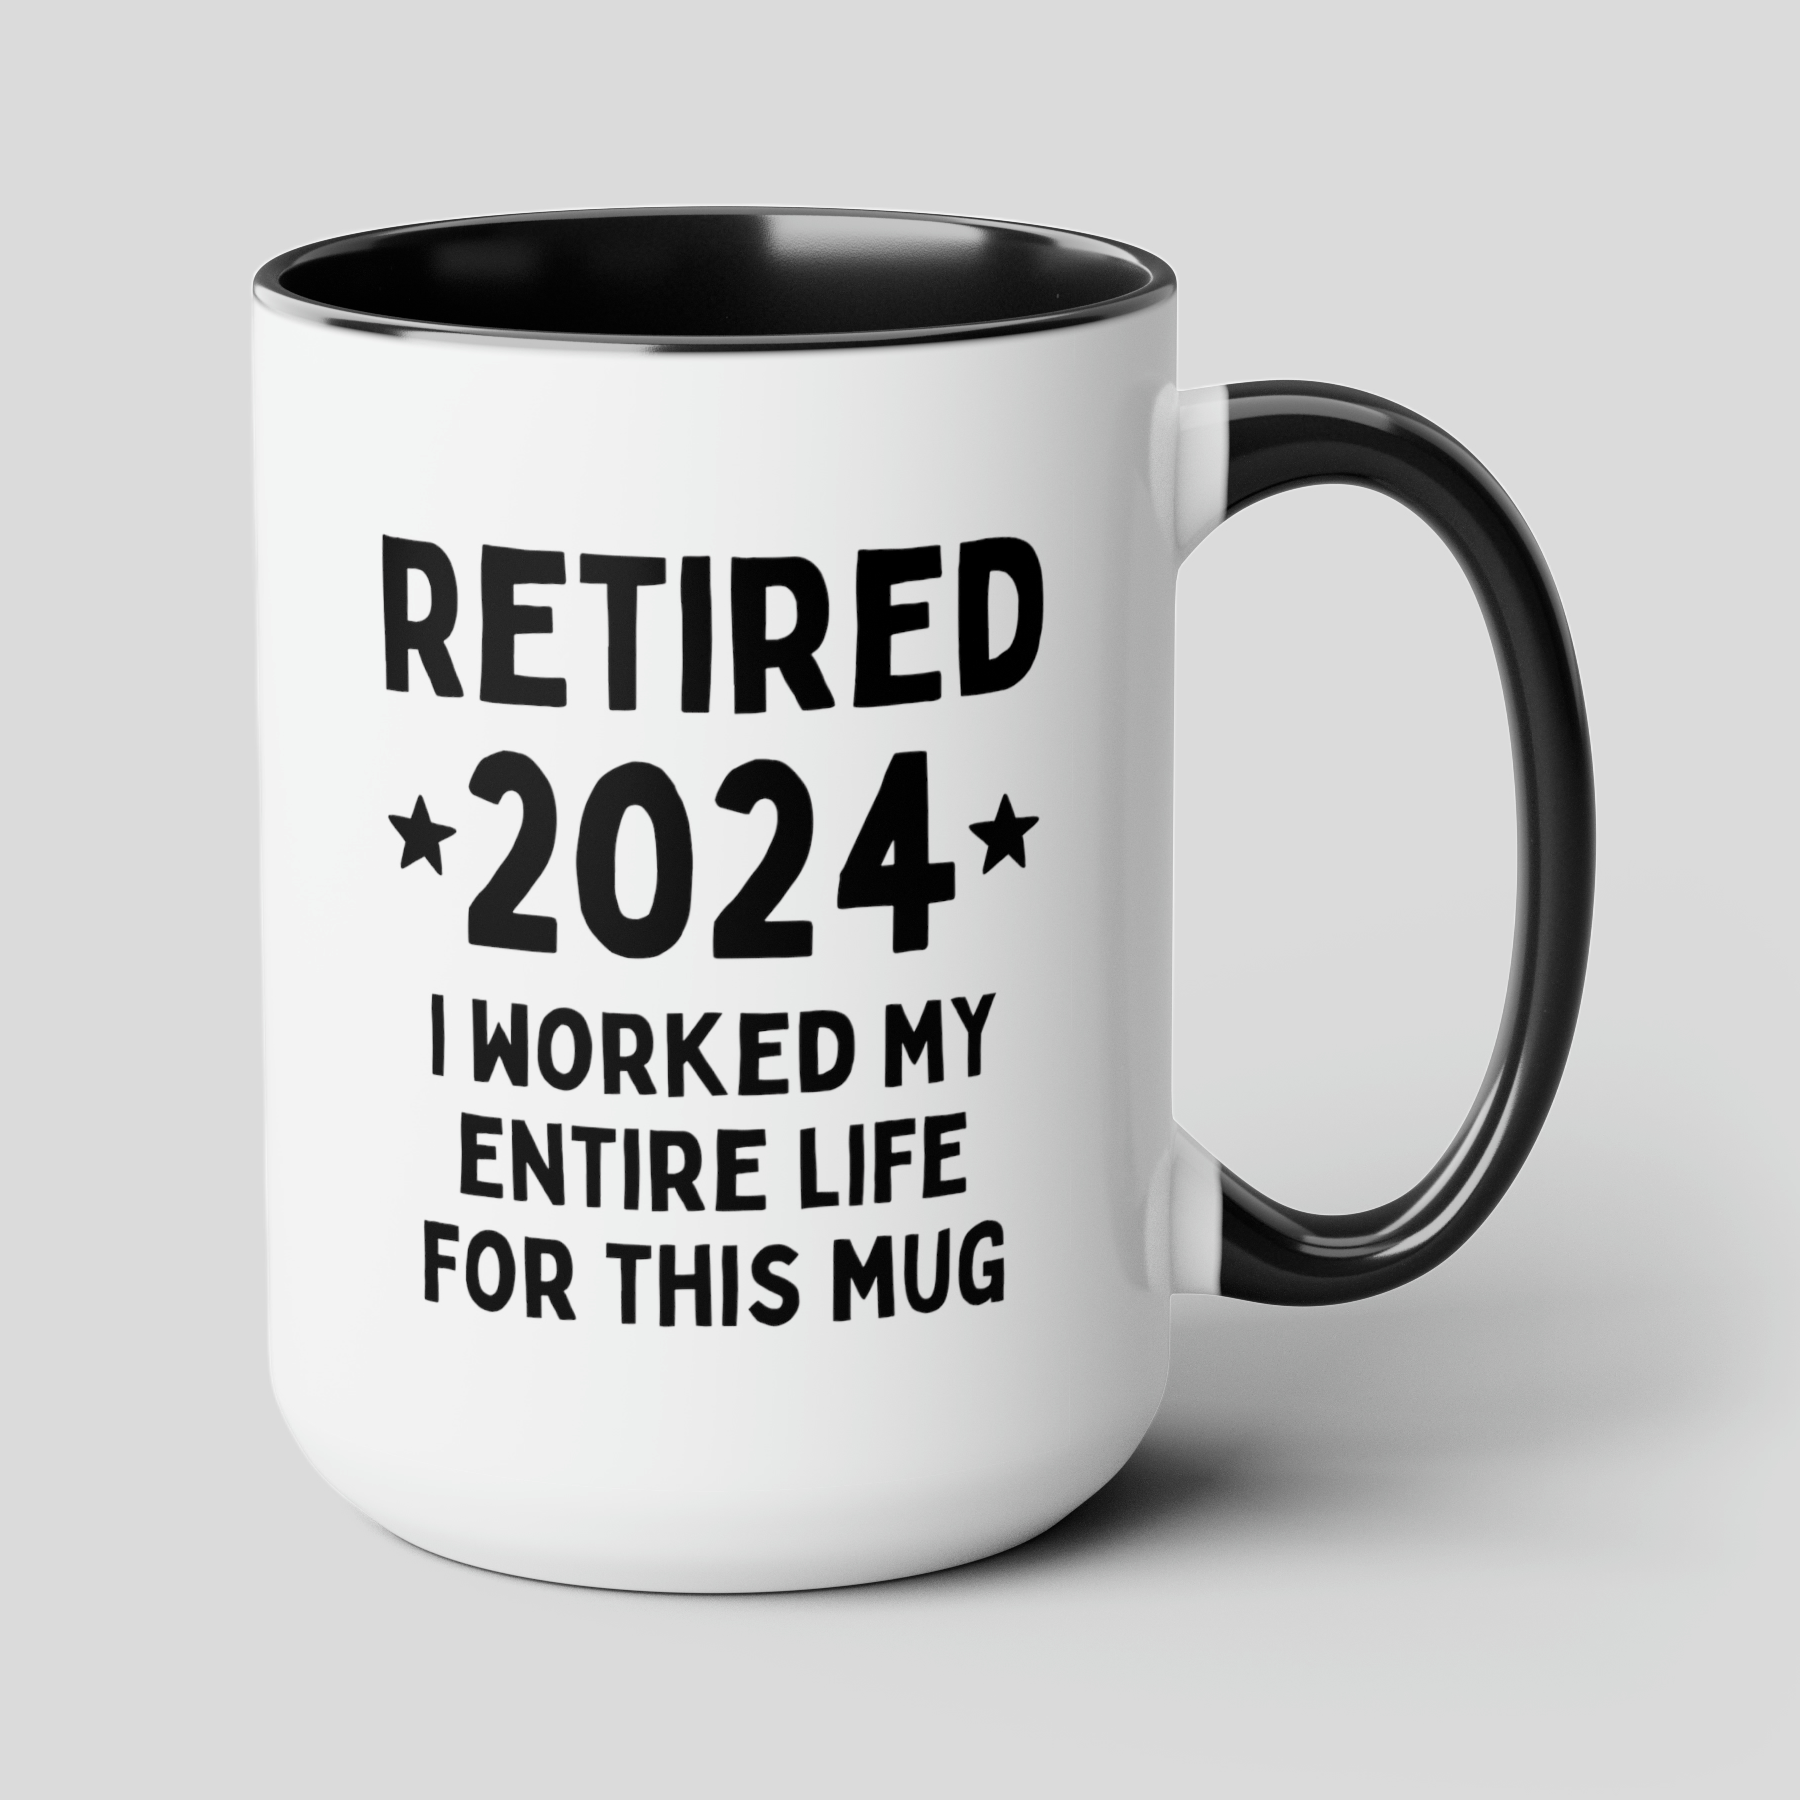 Retired 2024 I Worked My Entire Life For This Mug 15oz white with black accent funny large coffee mug gift for retirement man woman waveywares wavey wares wavywares wavy wares cover